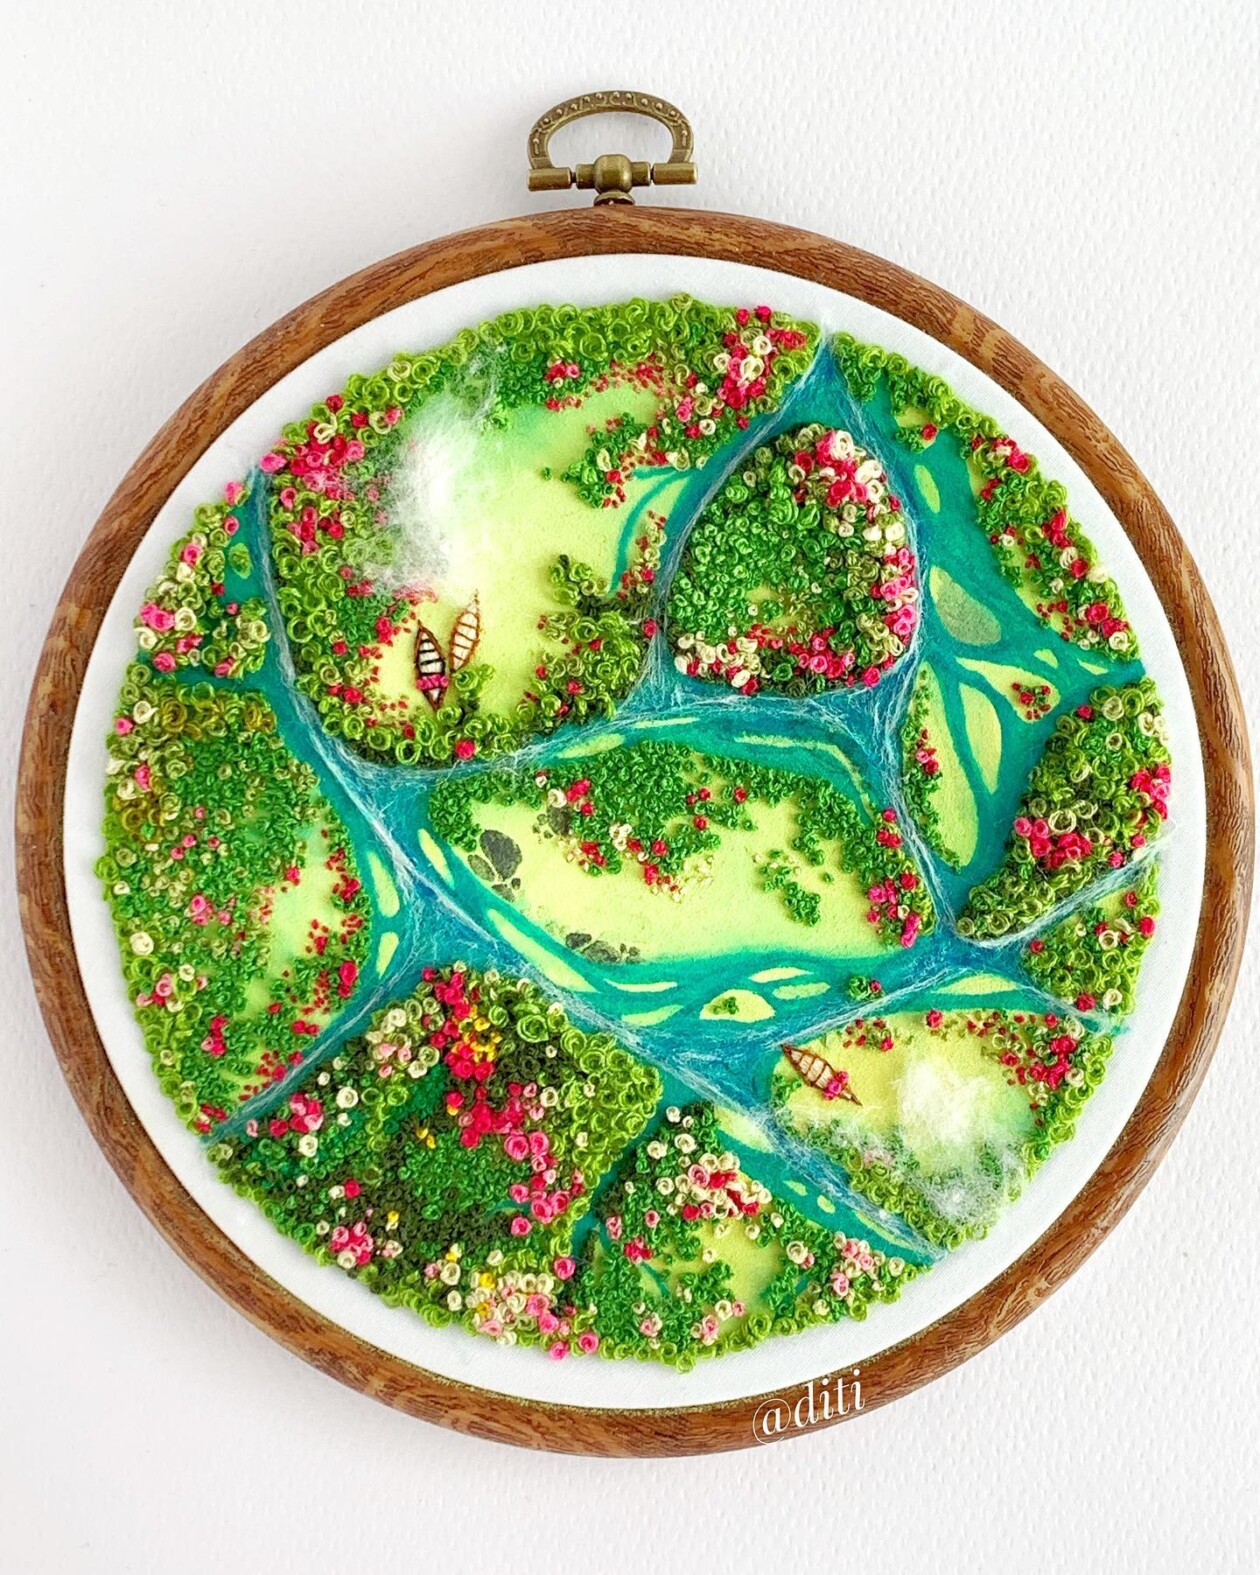 The Magnificent Aerial Landscape Embroideries Of Diti Baruah (14)